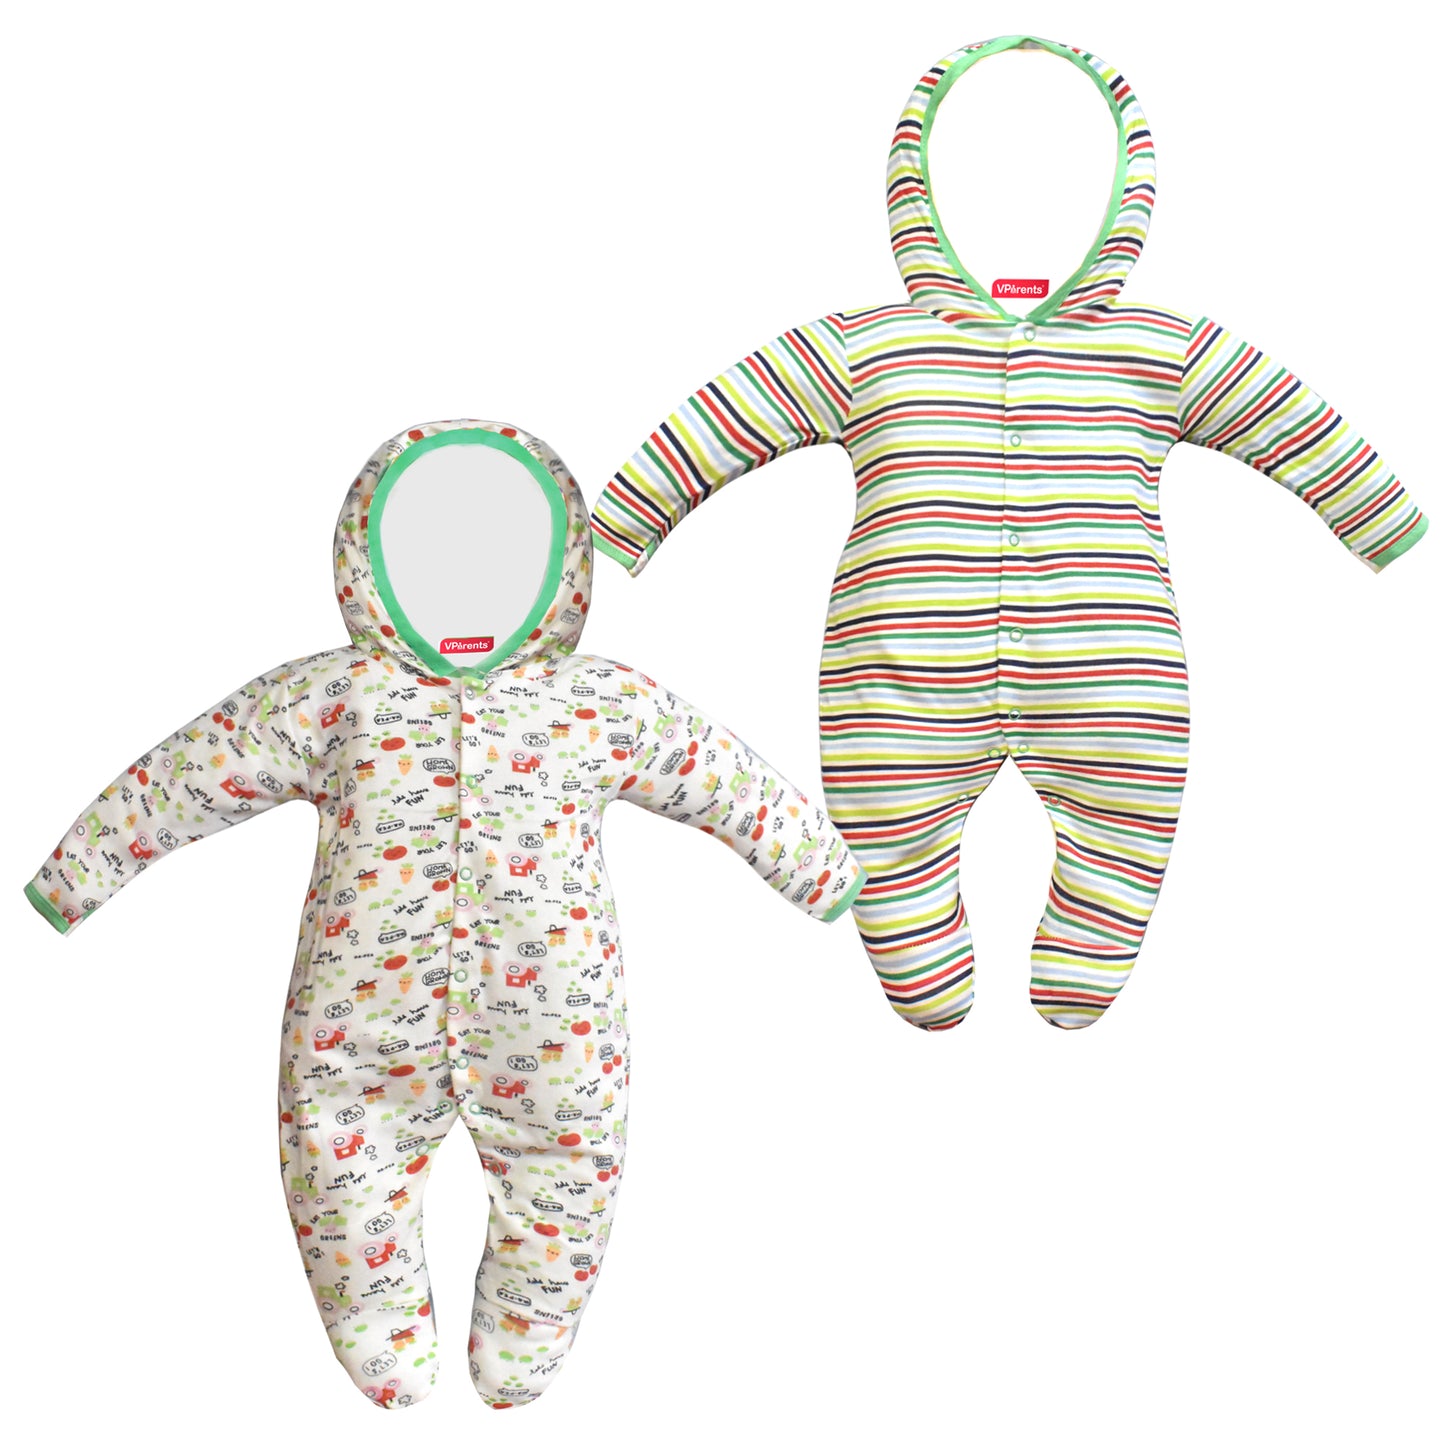 Zoey Green Hooded Full Sleeve Cotton Sleepsuit Rompers for boys & Girls (Pack of 2)